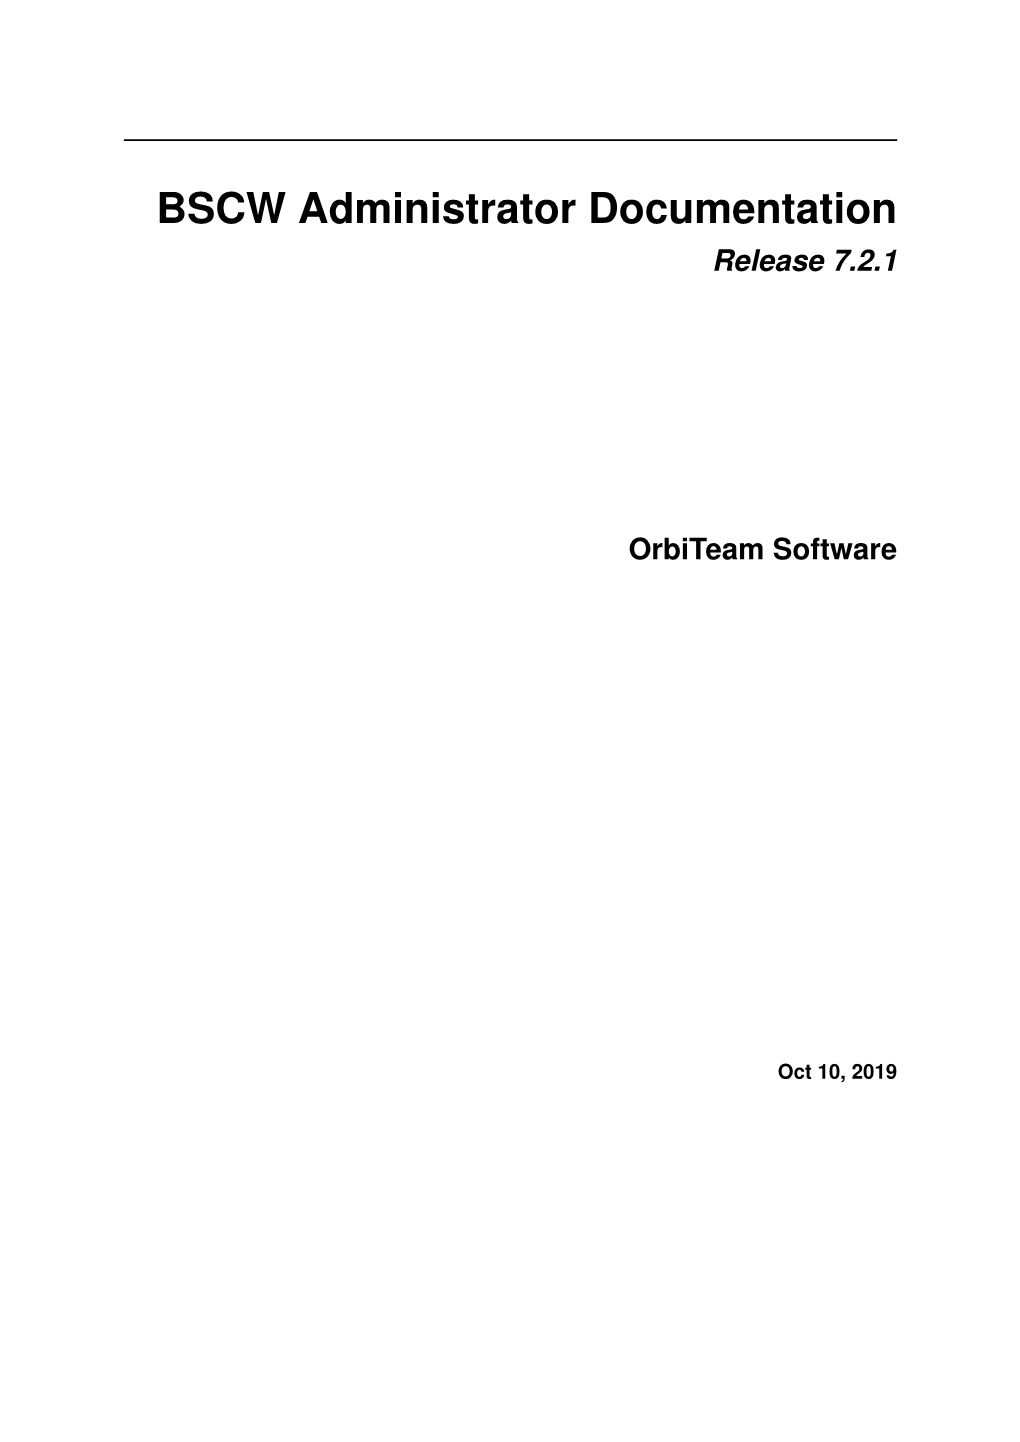 BSCW Administrator Documentation Release 7.2.1